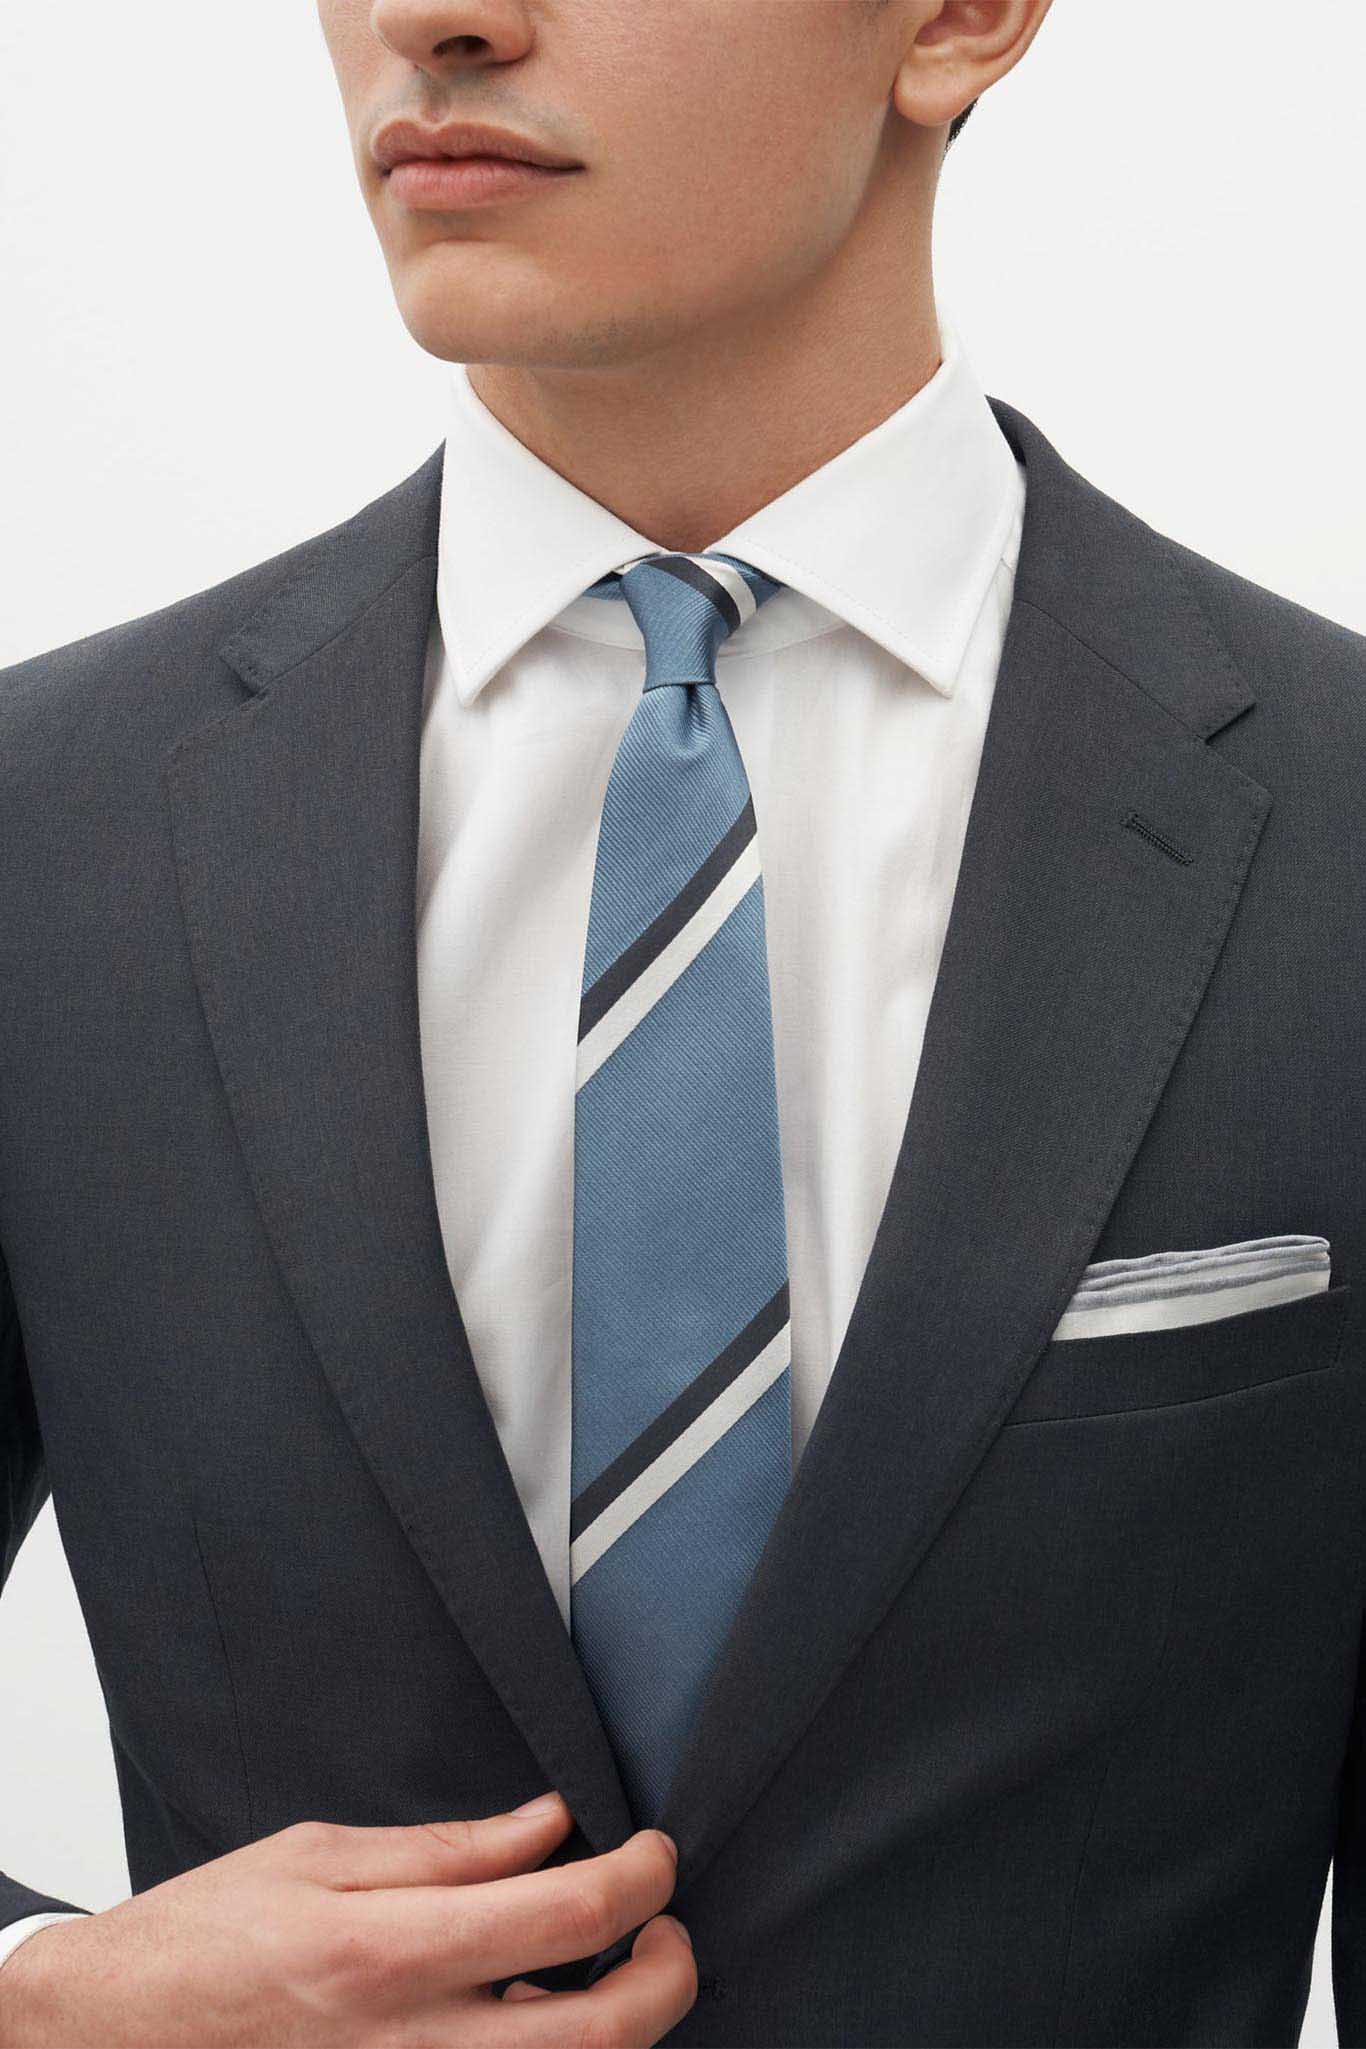 Charcoal Gray Suit by SuitShop